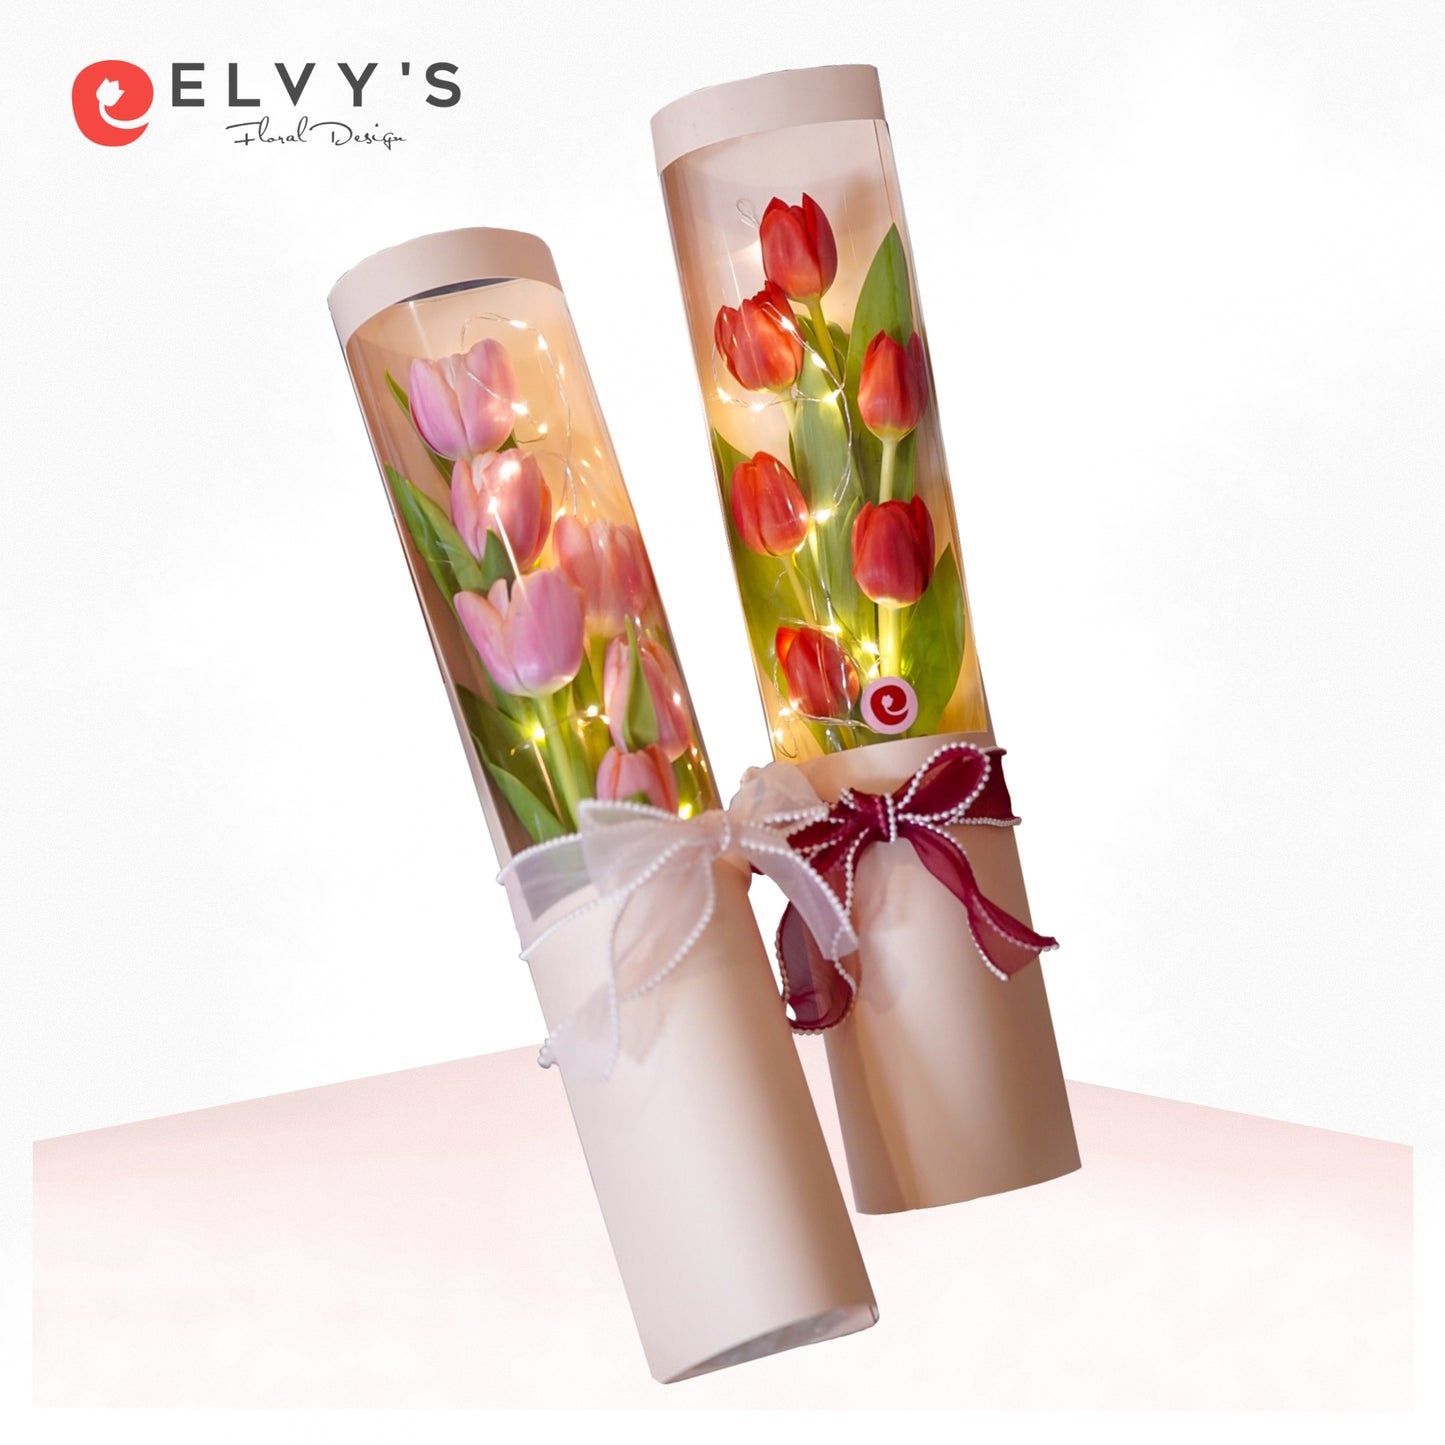 Holland Tulips in the Bliss Box | Elvy's Floral Design